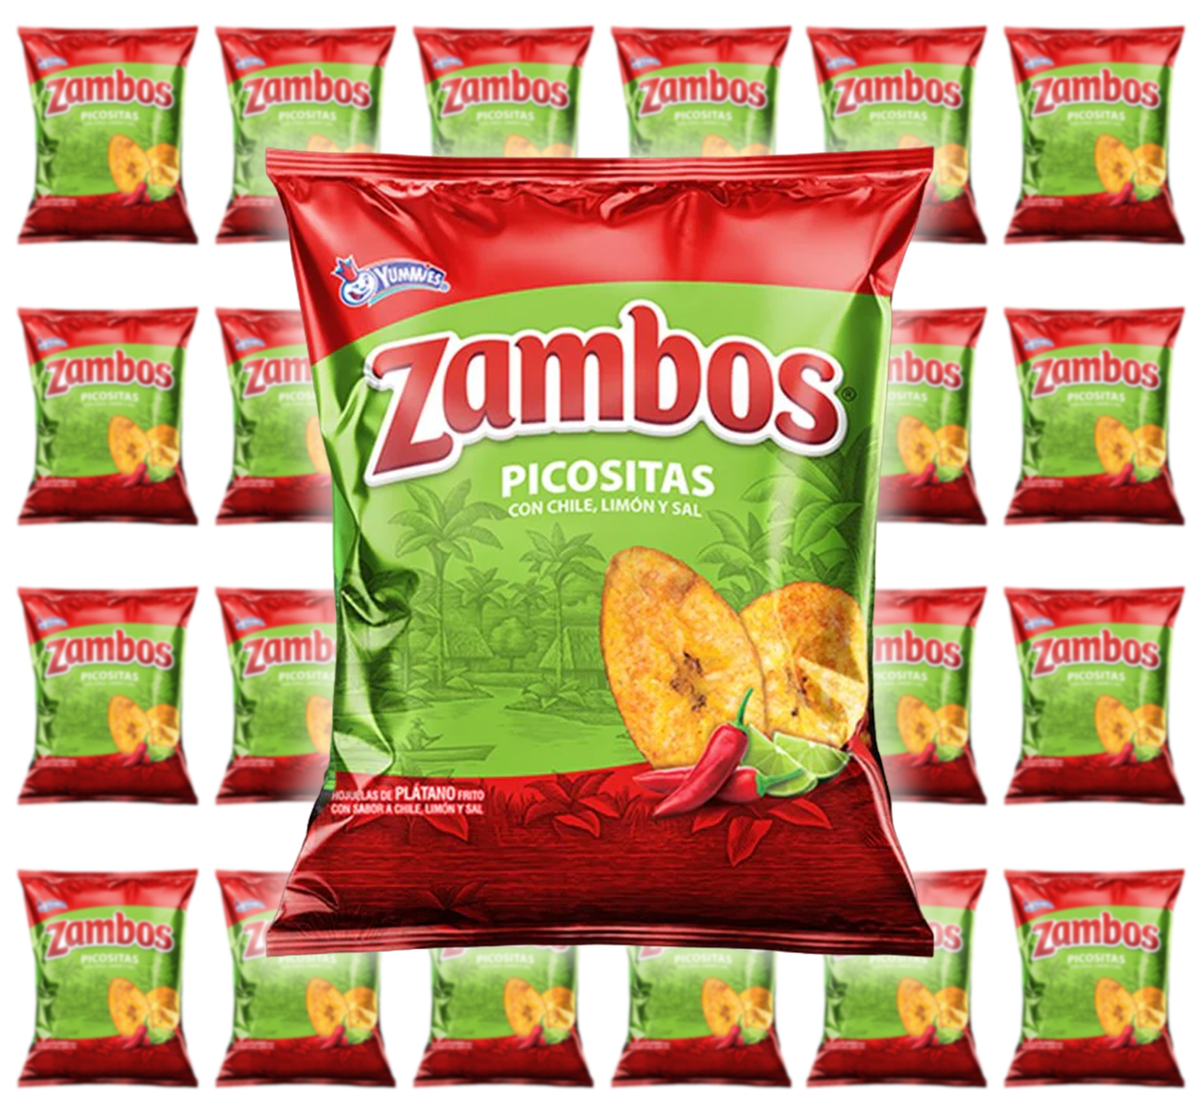 24 Bags of Zambos plantain chips with chili, lime and salt